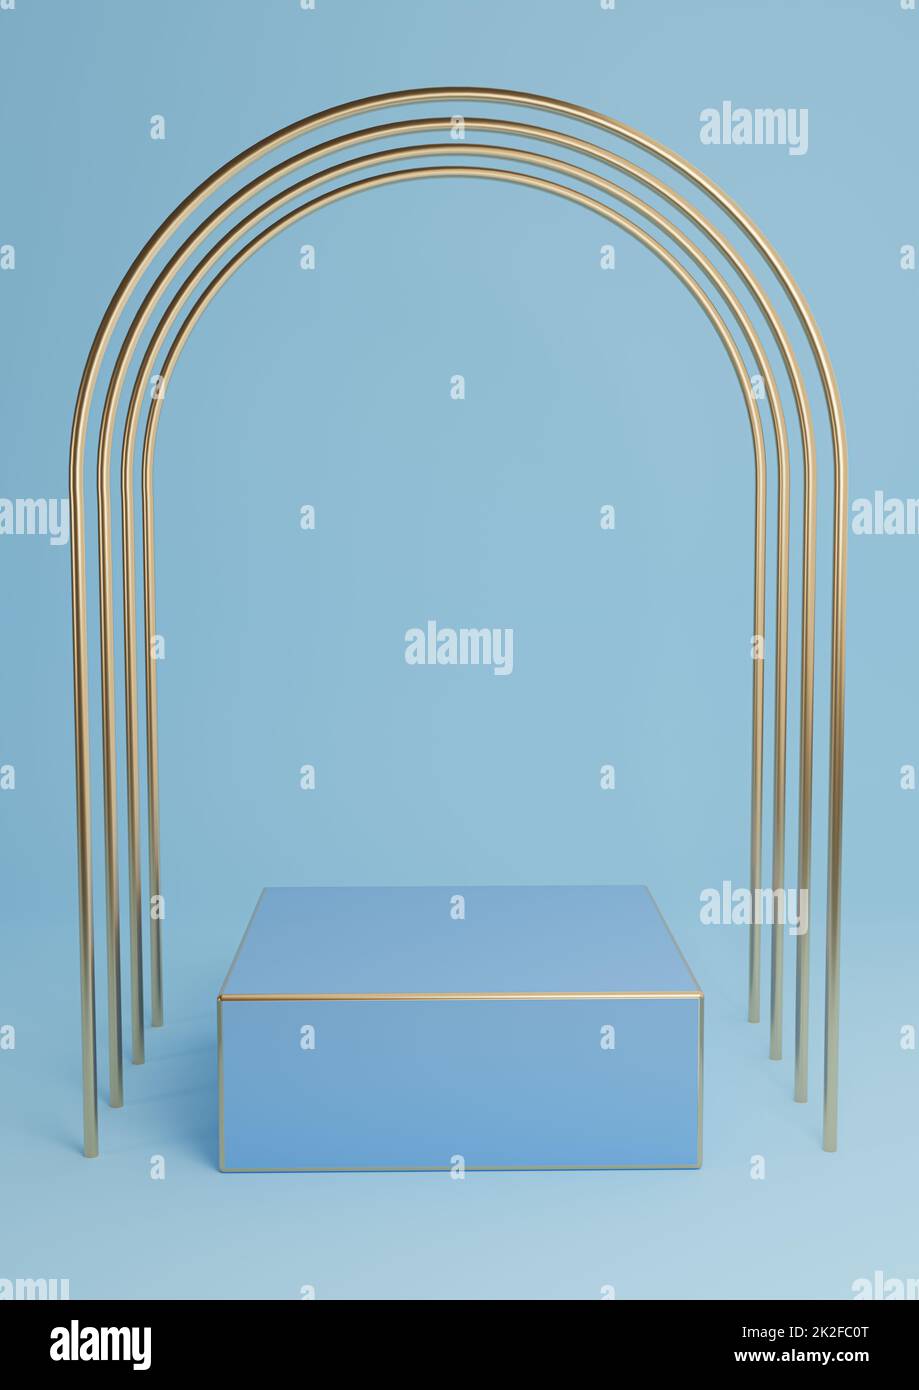 Bright, light sky blue 3D rendering minimal product display cube podium or stand with luxury gold arches and golden lines. Simple background abstract composition. Stock Photo